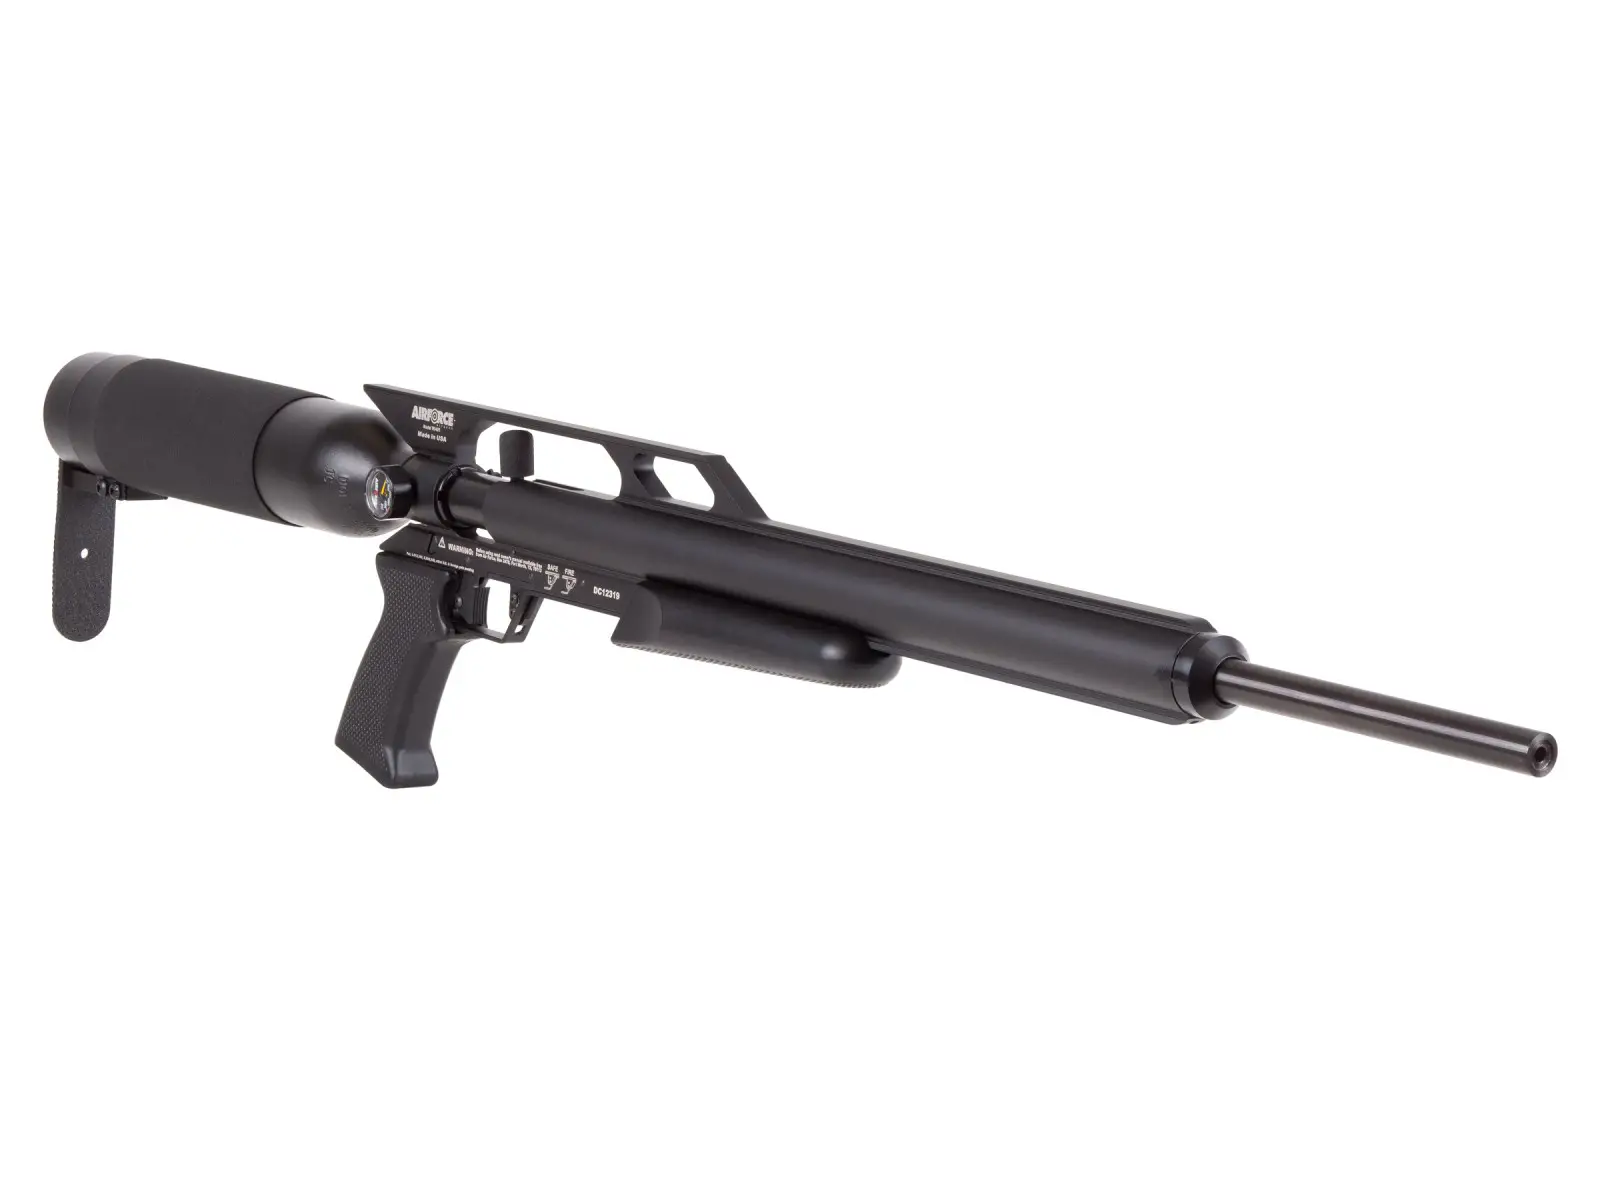 condor1 Best PCP air rifles - 15 of the best PCP guns you can buy right now (Reviews and Buying Guide 2022)